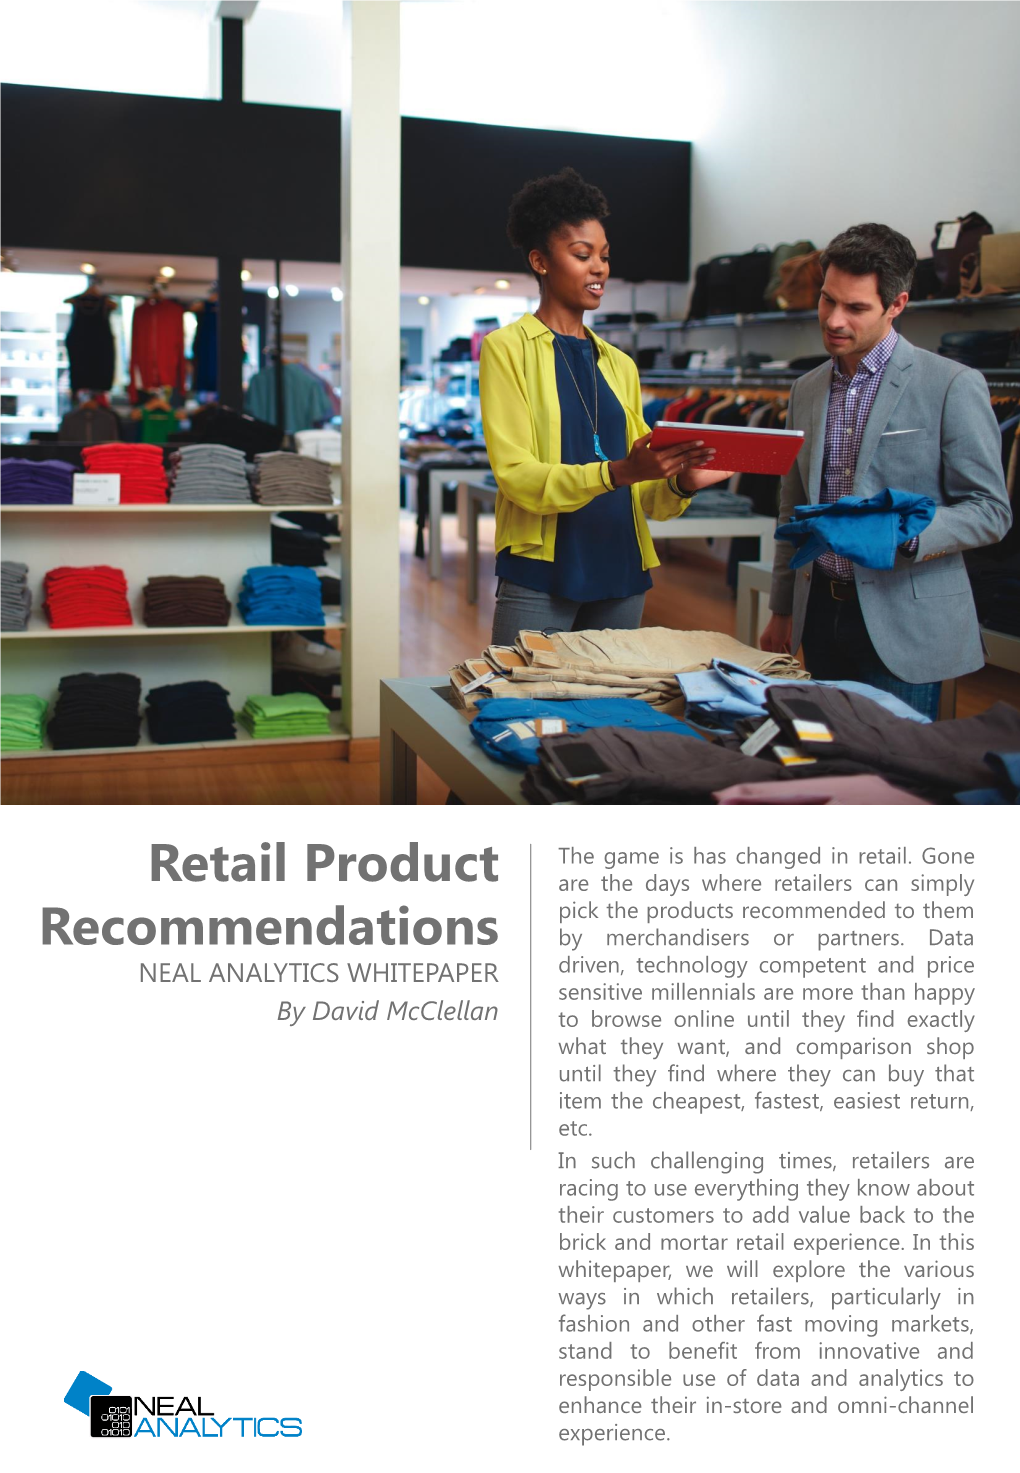 Retail Product Recommendations Remaining Competitive in a Rapidly Changing Industry